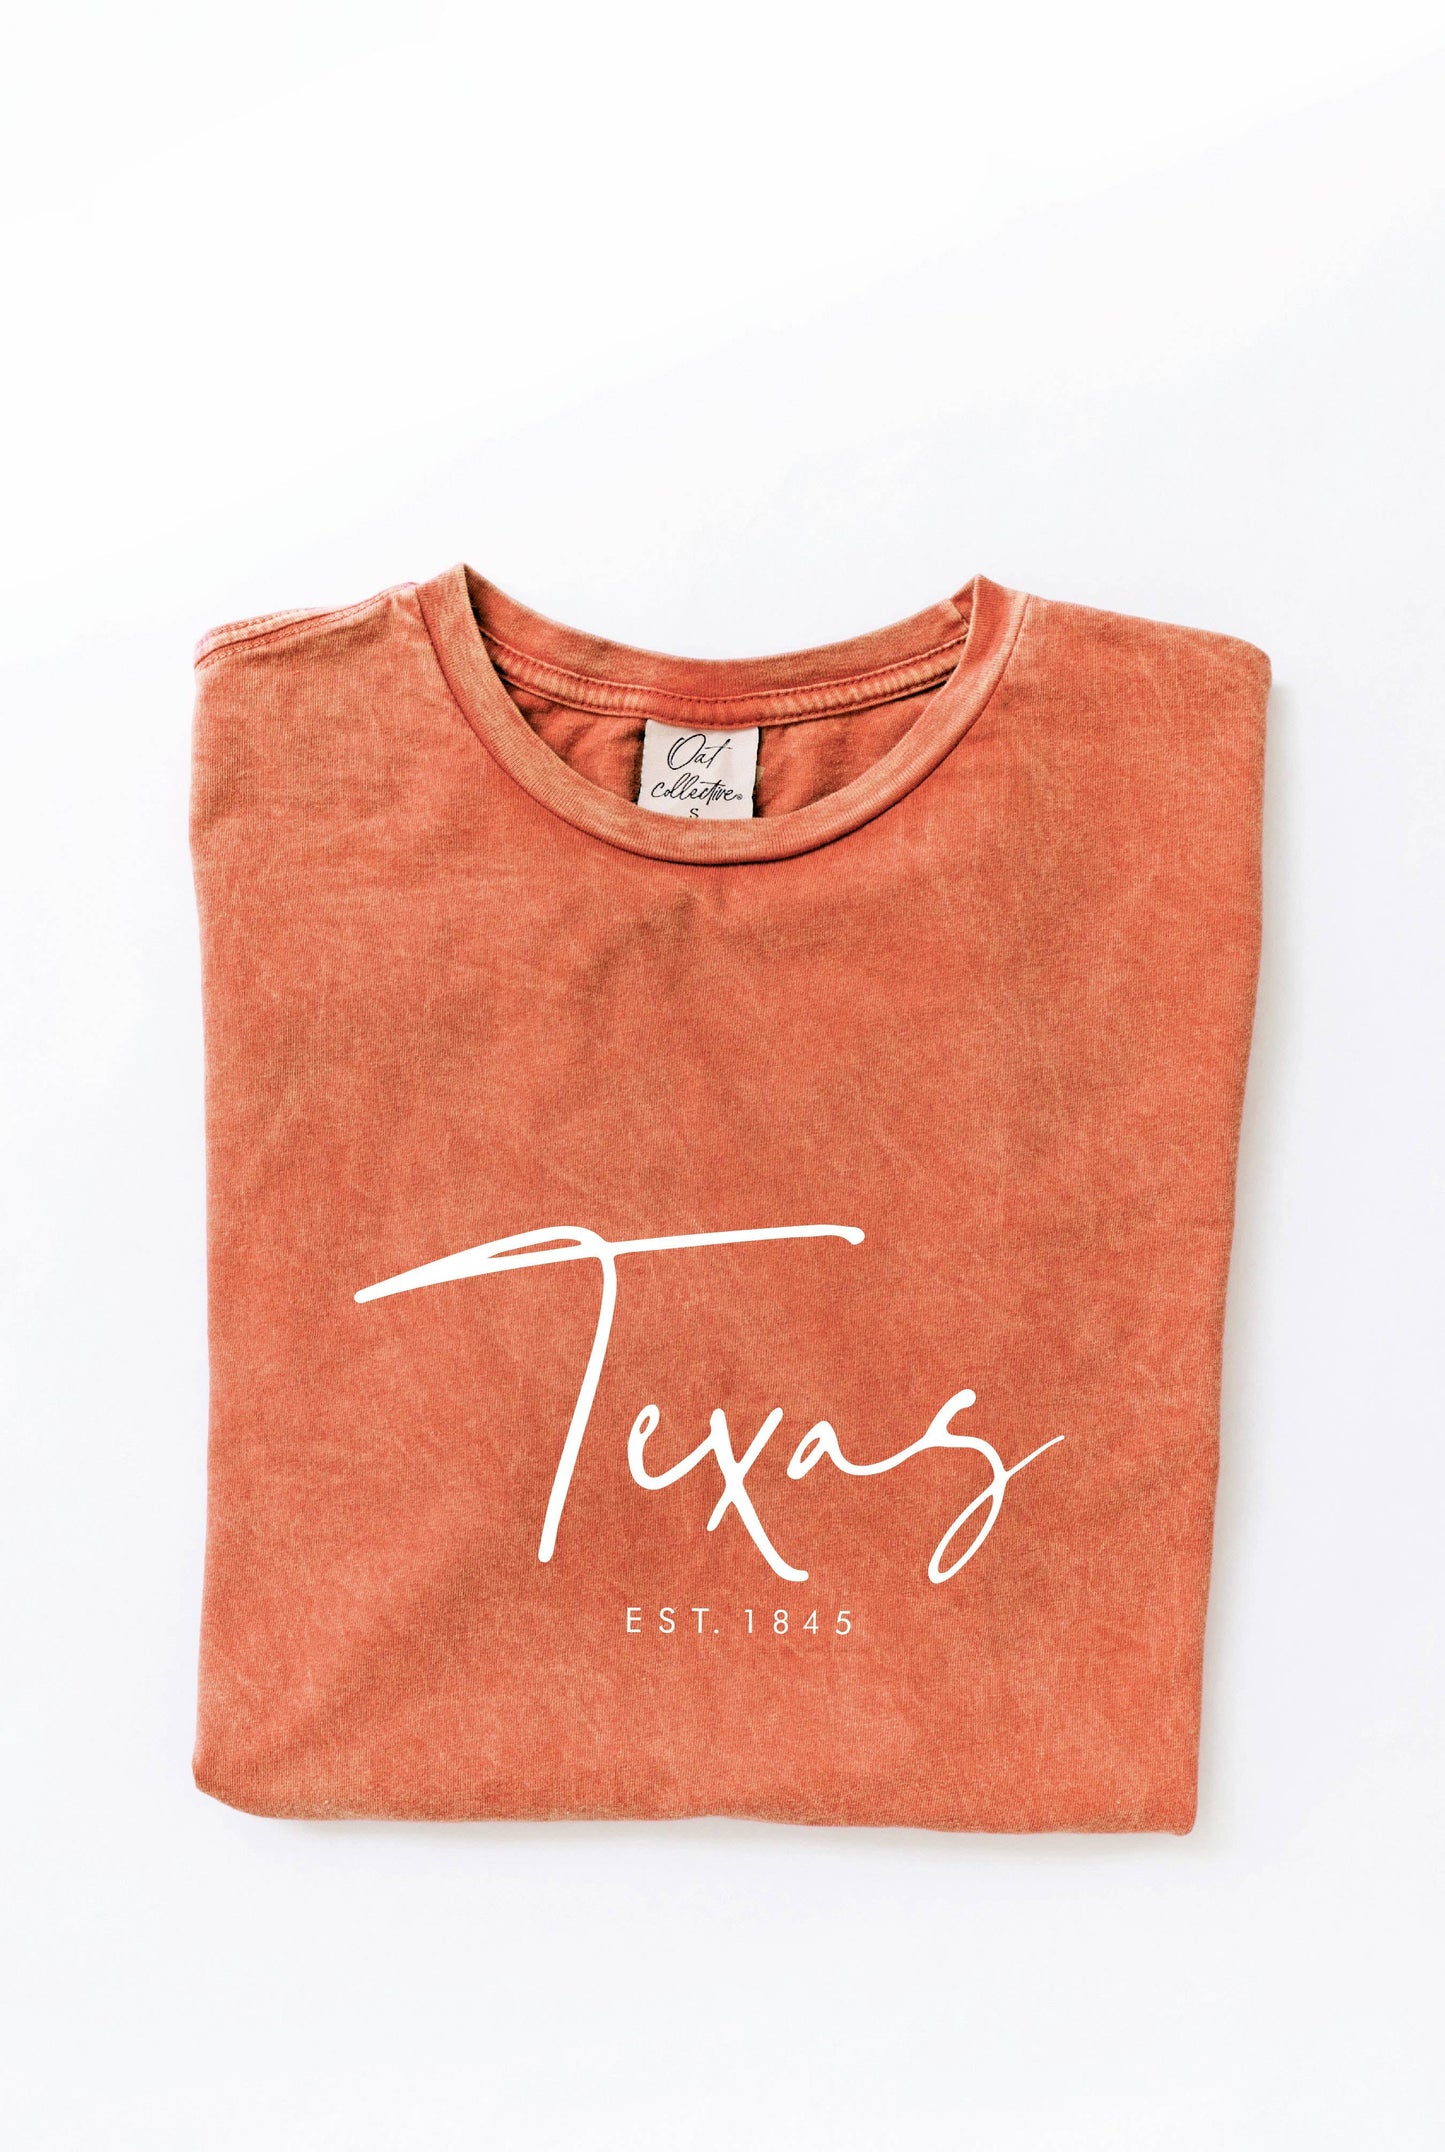 TEXAS EST. 1845 Mineral Washed Graphic Top